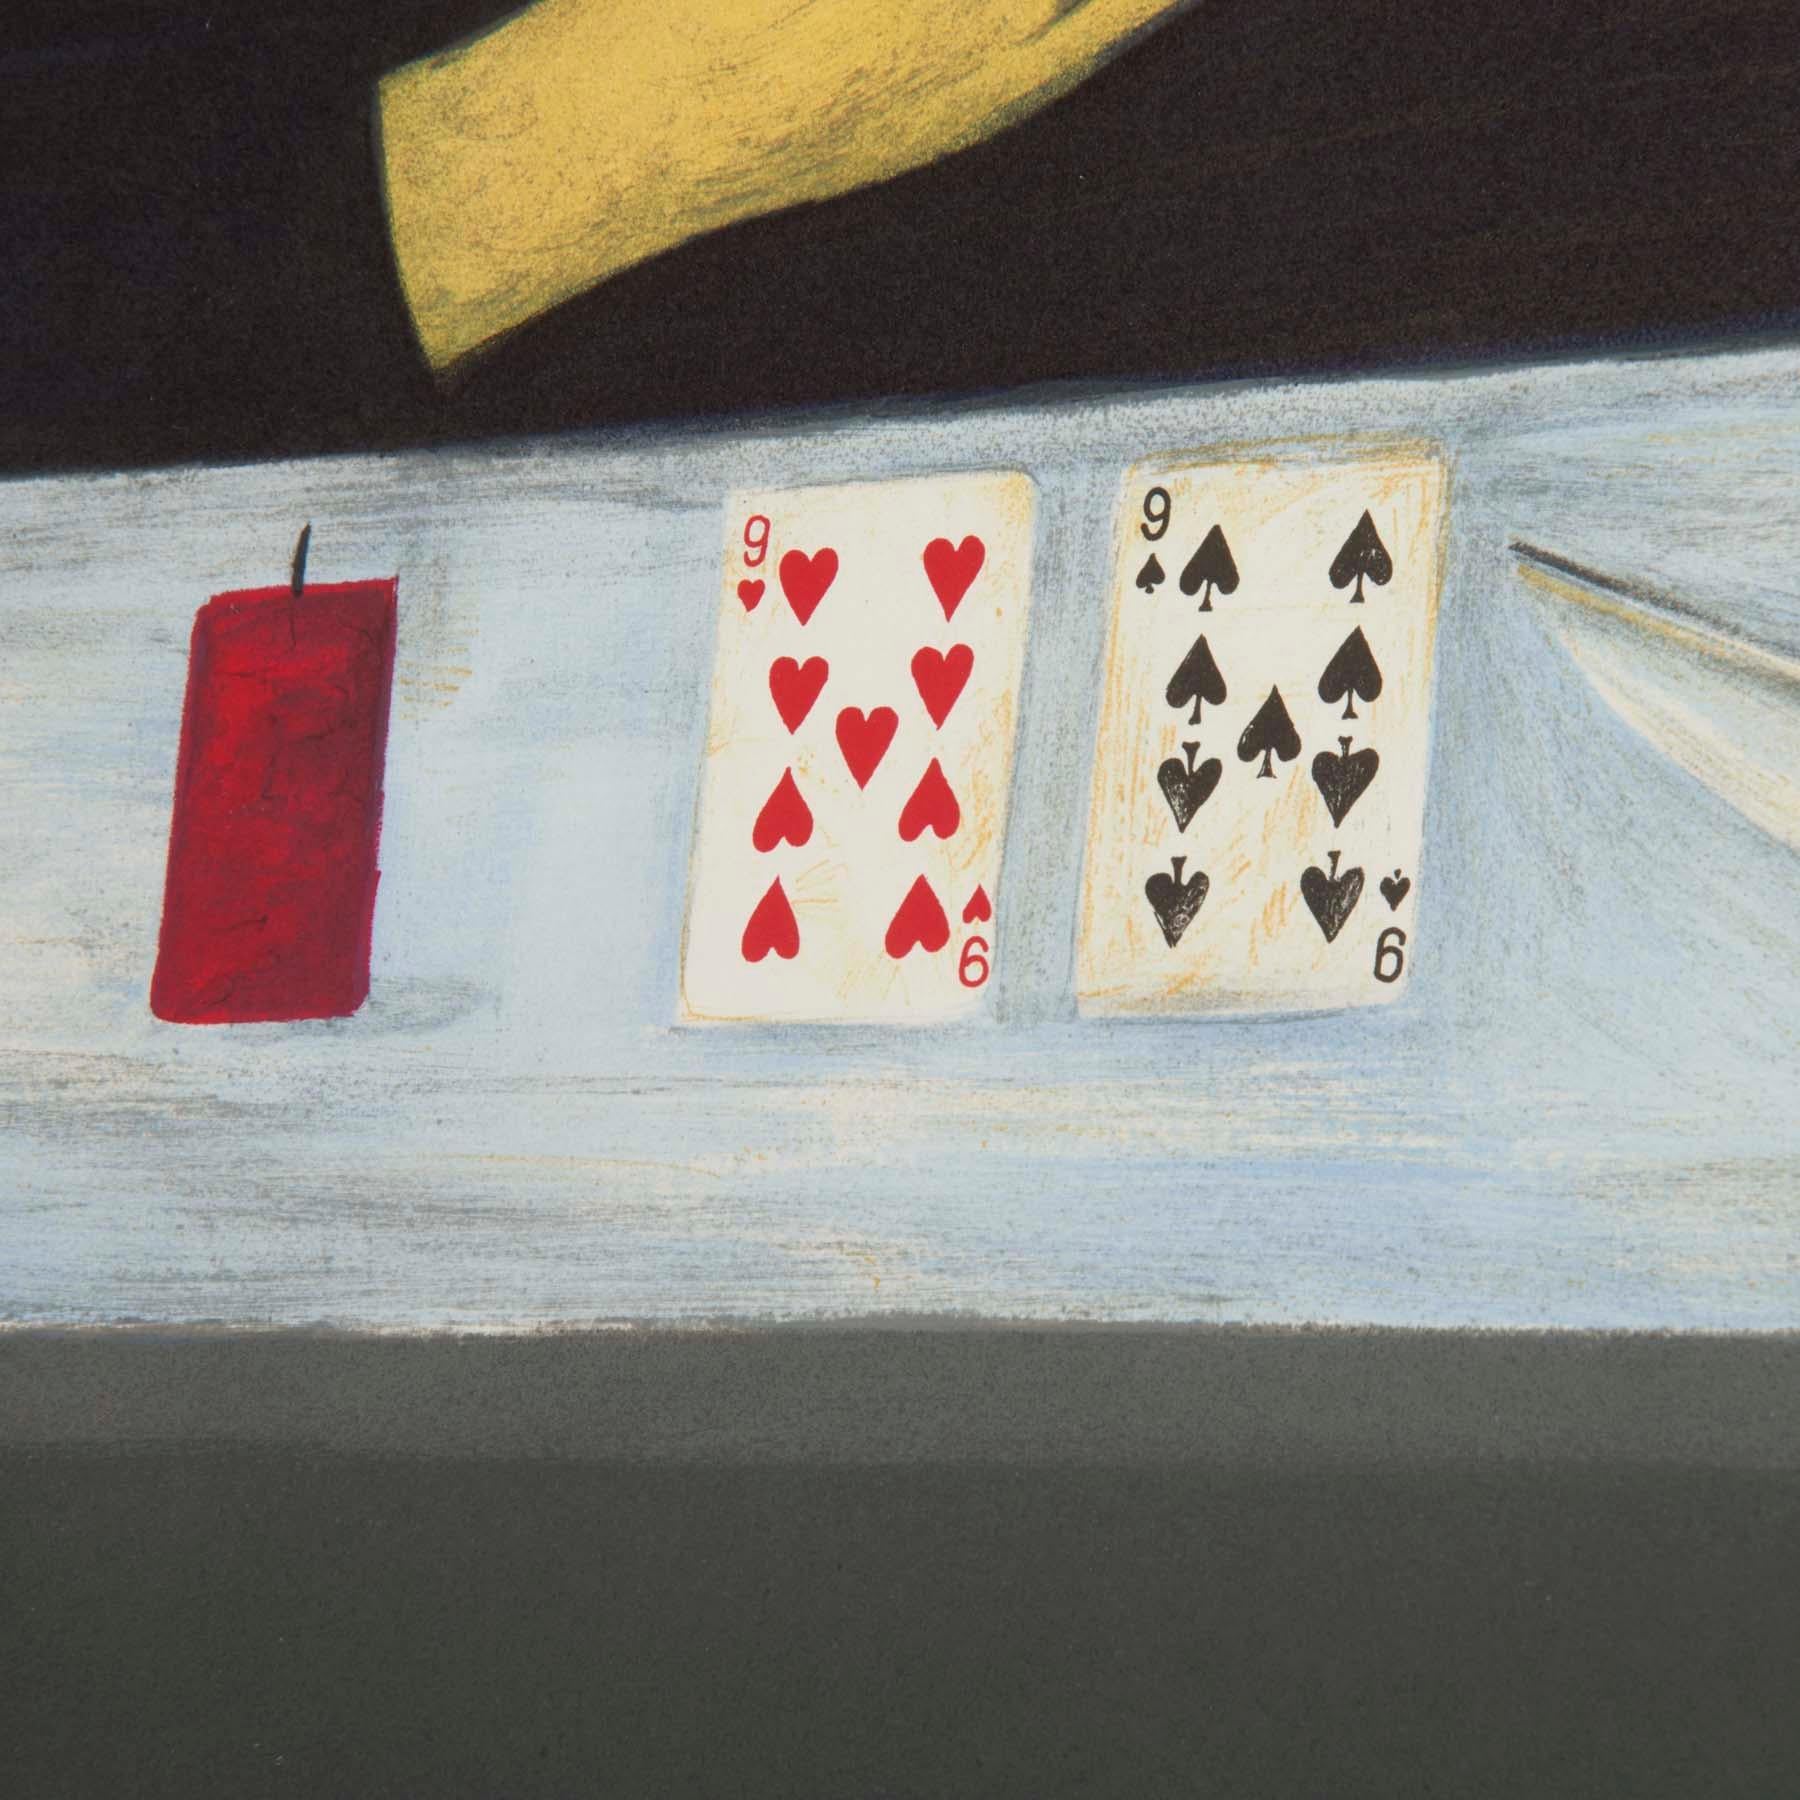 Nine of Hearts, Nine of Spades - Contemporary, 21st Century, Lithograph, Editon - Black Figurative Print by Zhang Xiaogang